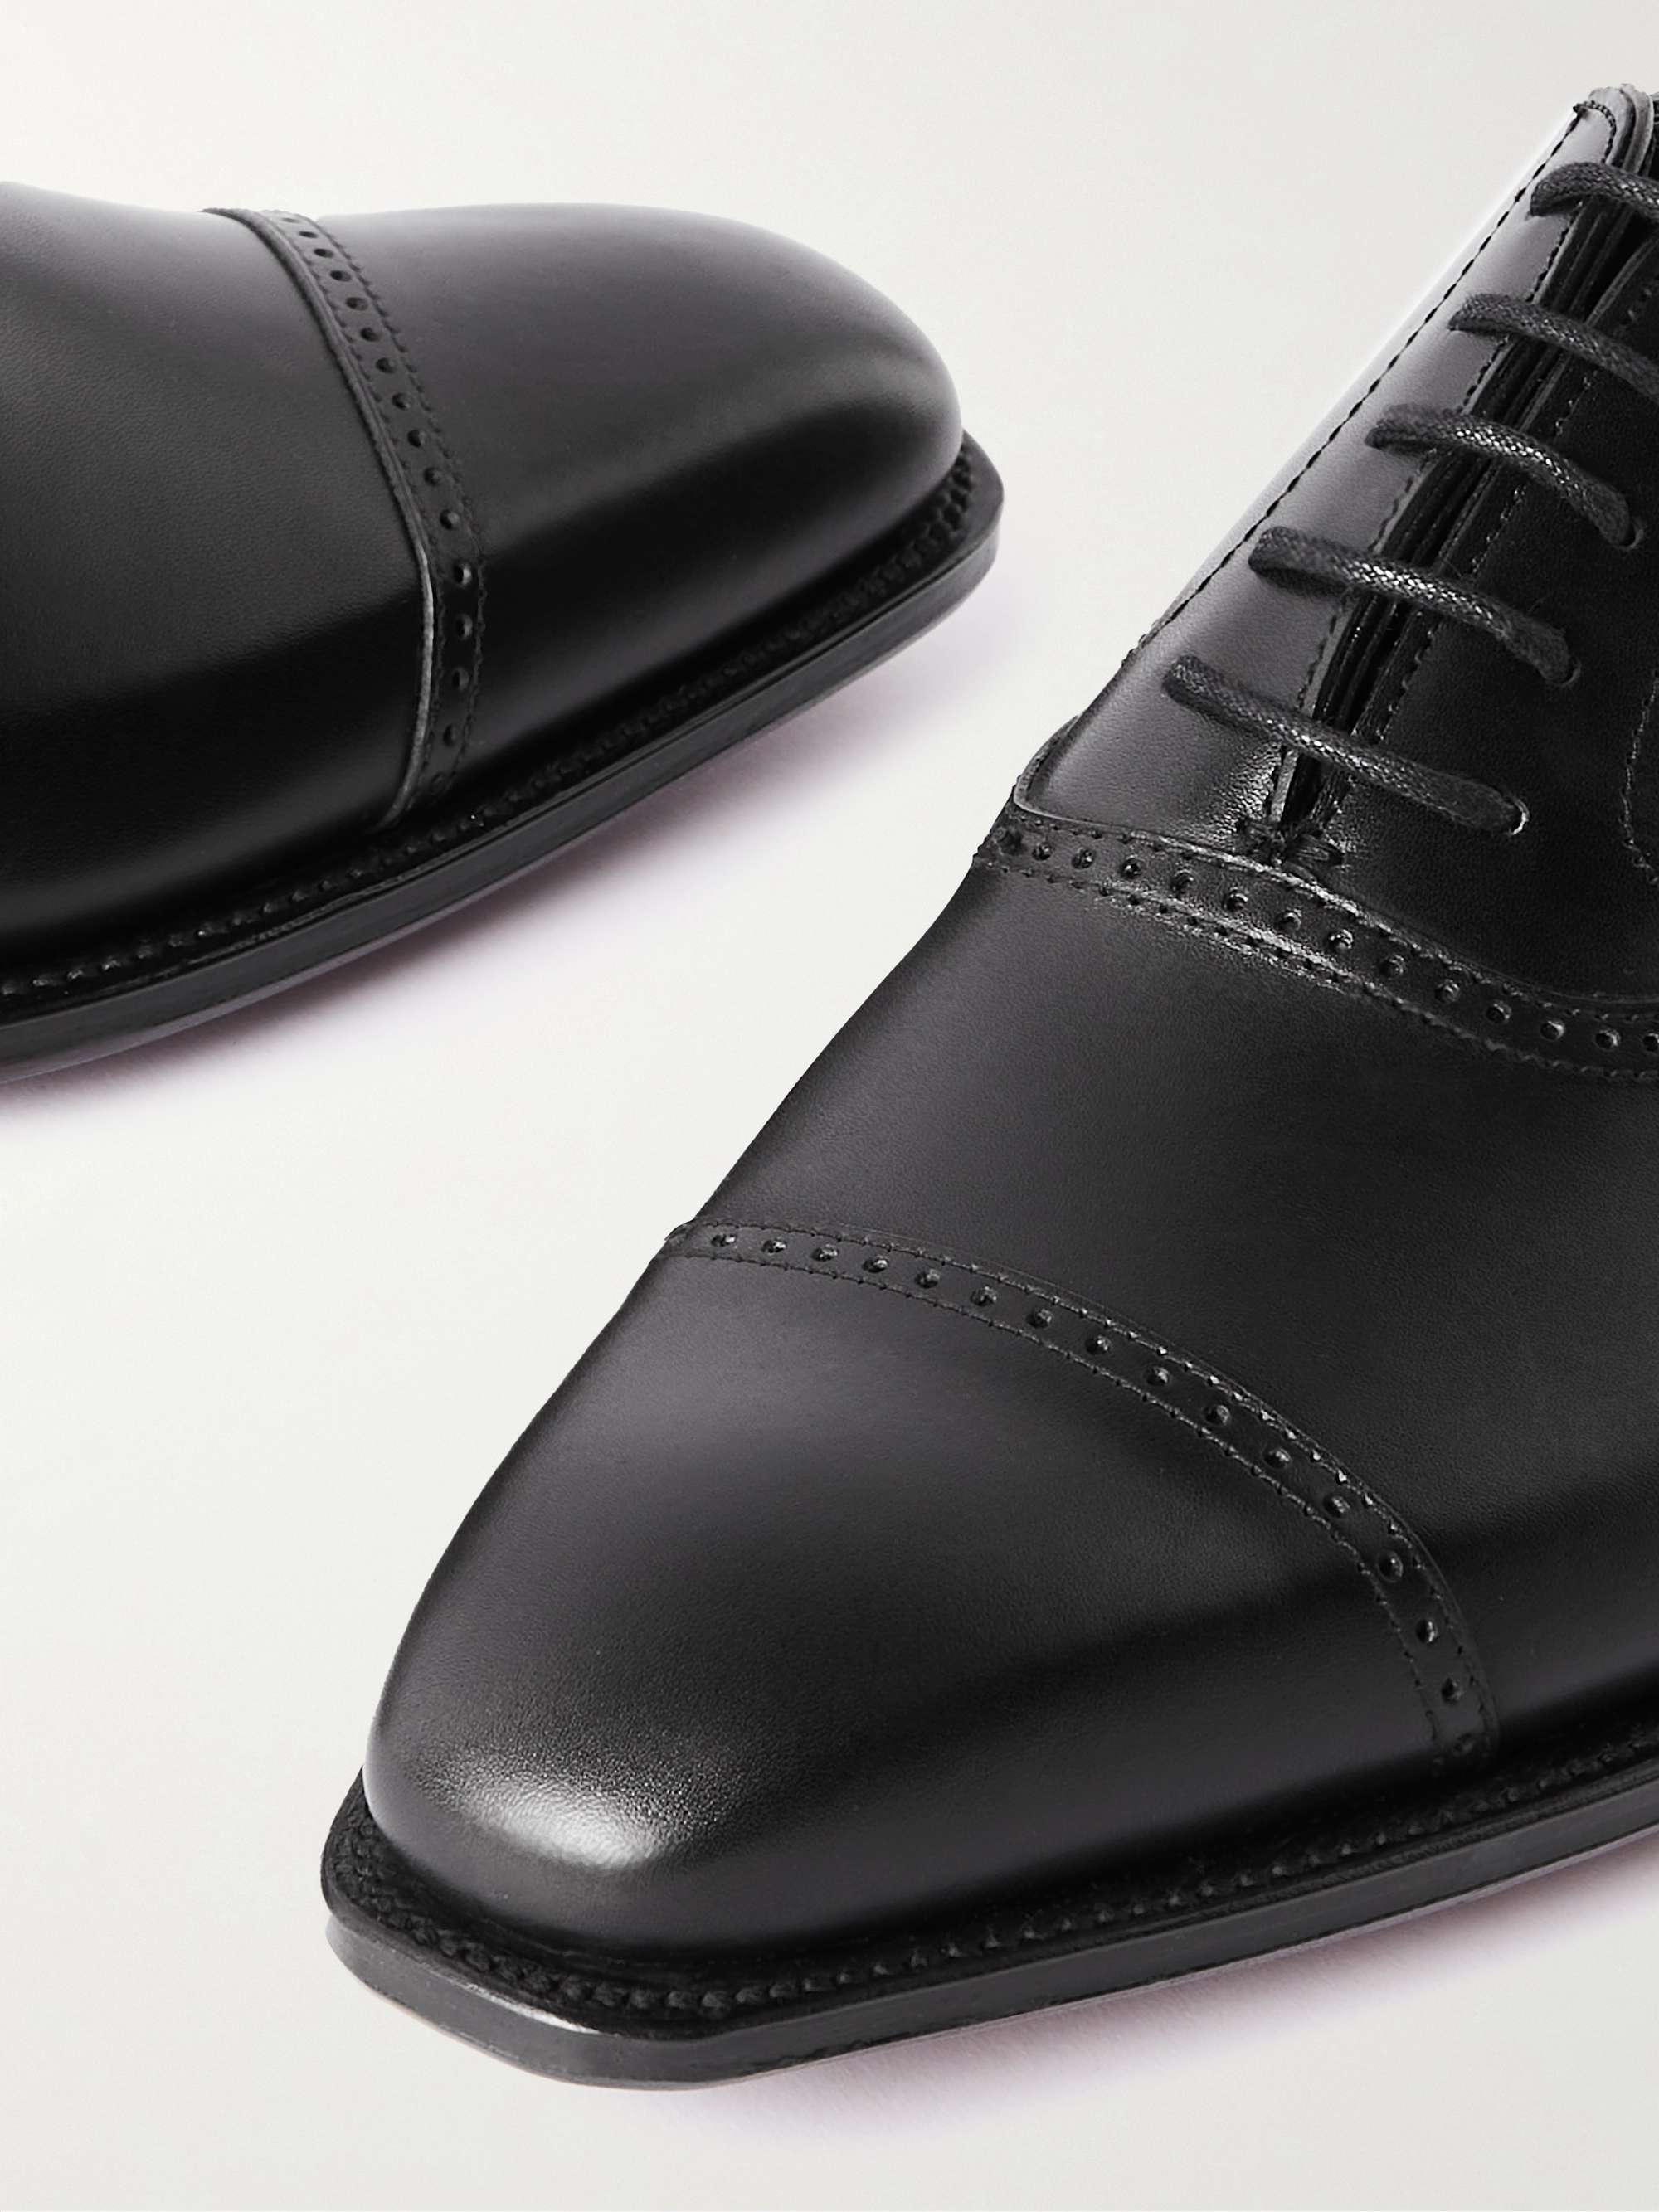 GEORGE CLEVERLEY Charles Leather Oxford Shoes